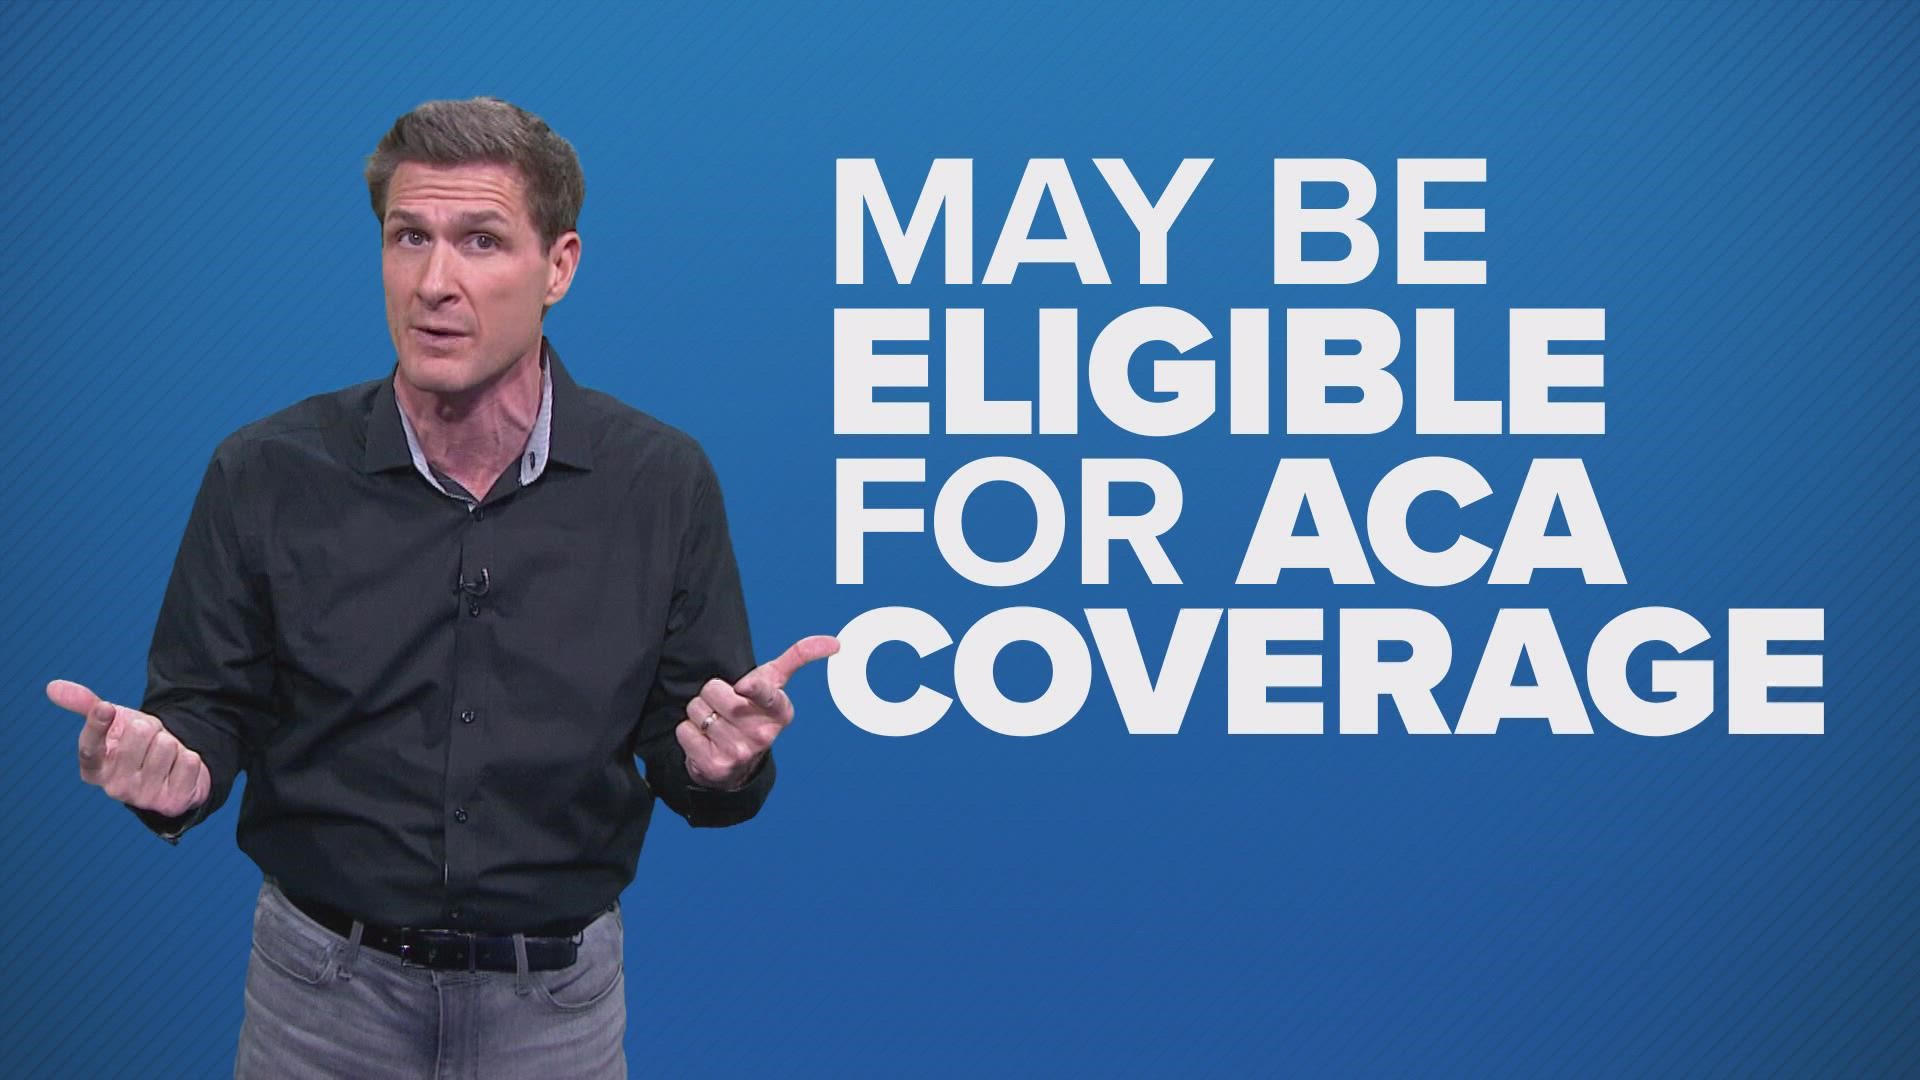 Many Texas families who previously didn’t qualify for coverage under the Affordable Care Act may benefit from a new rule.